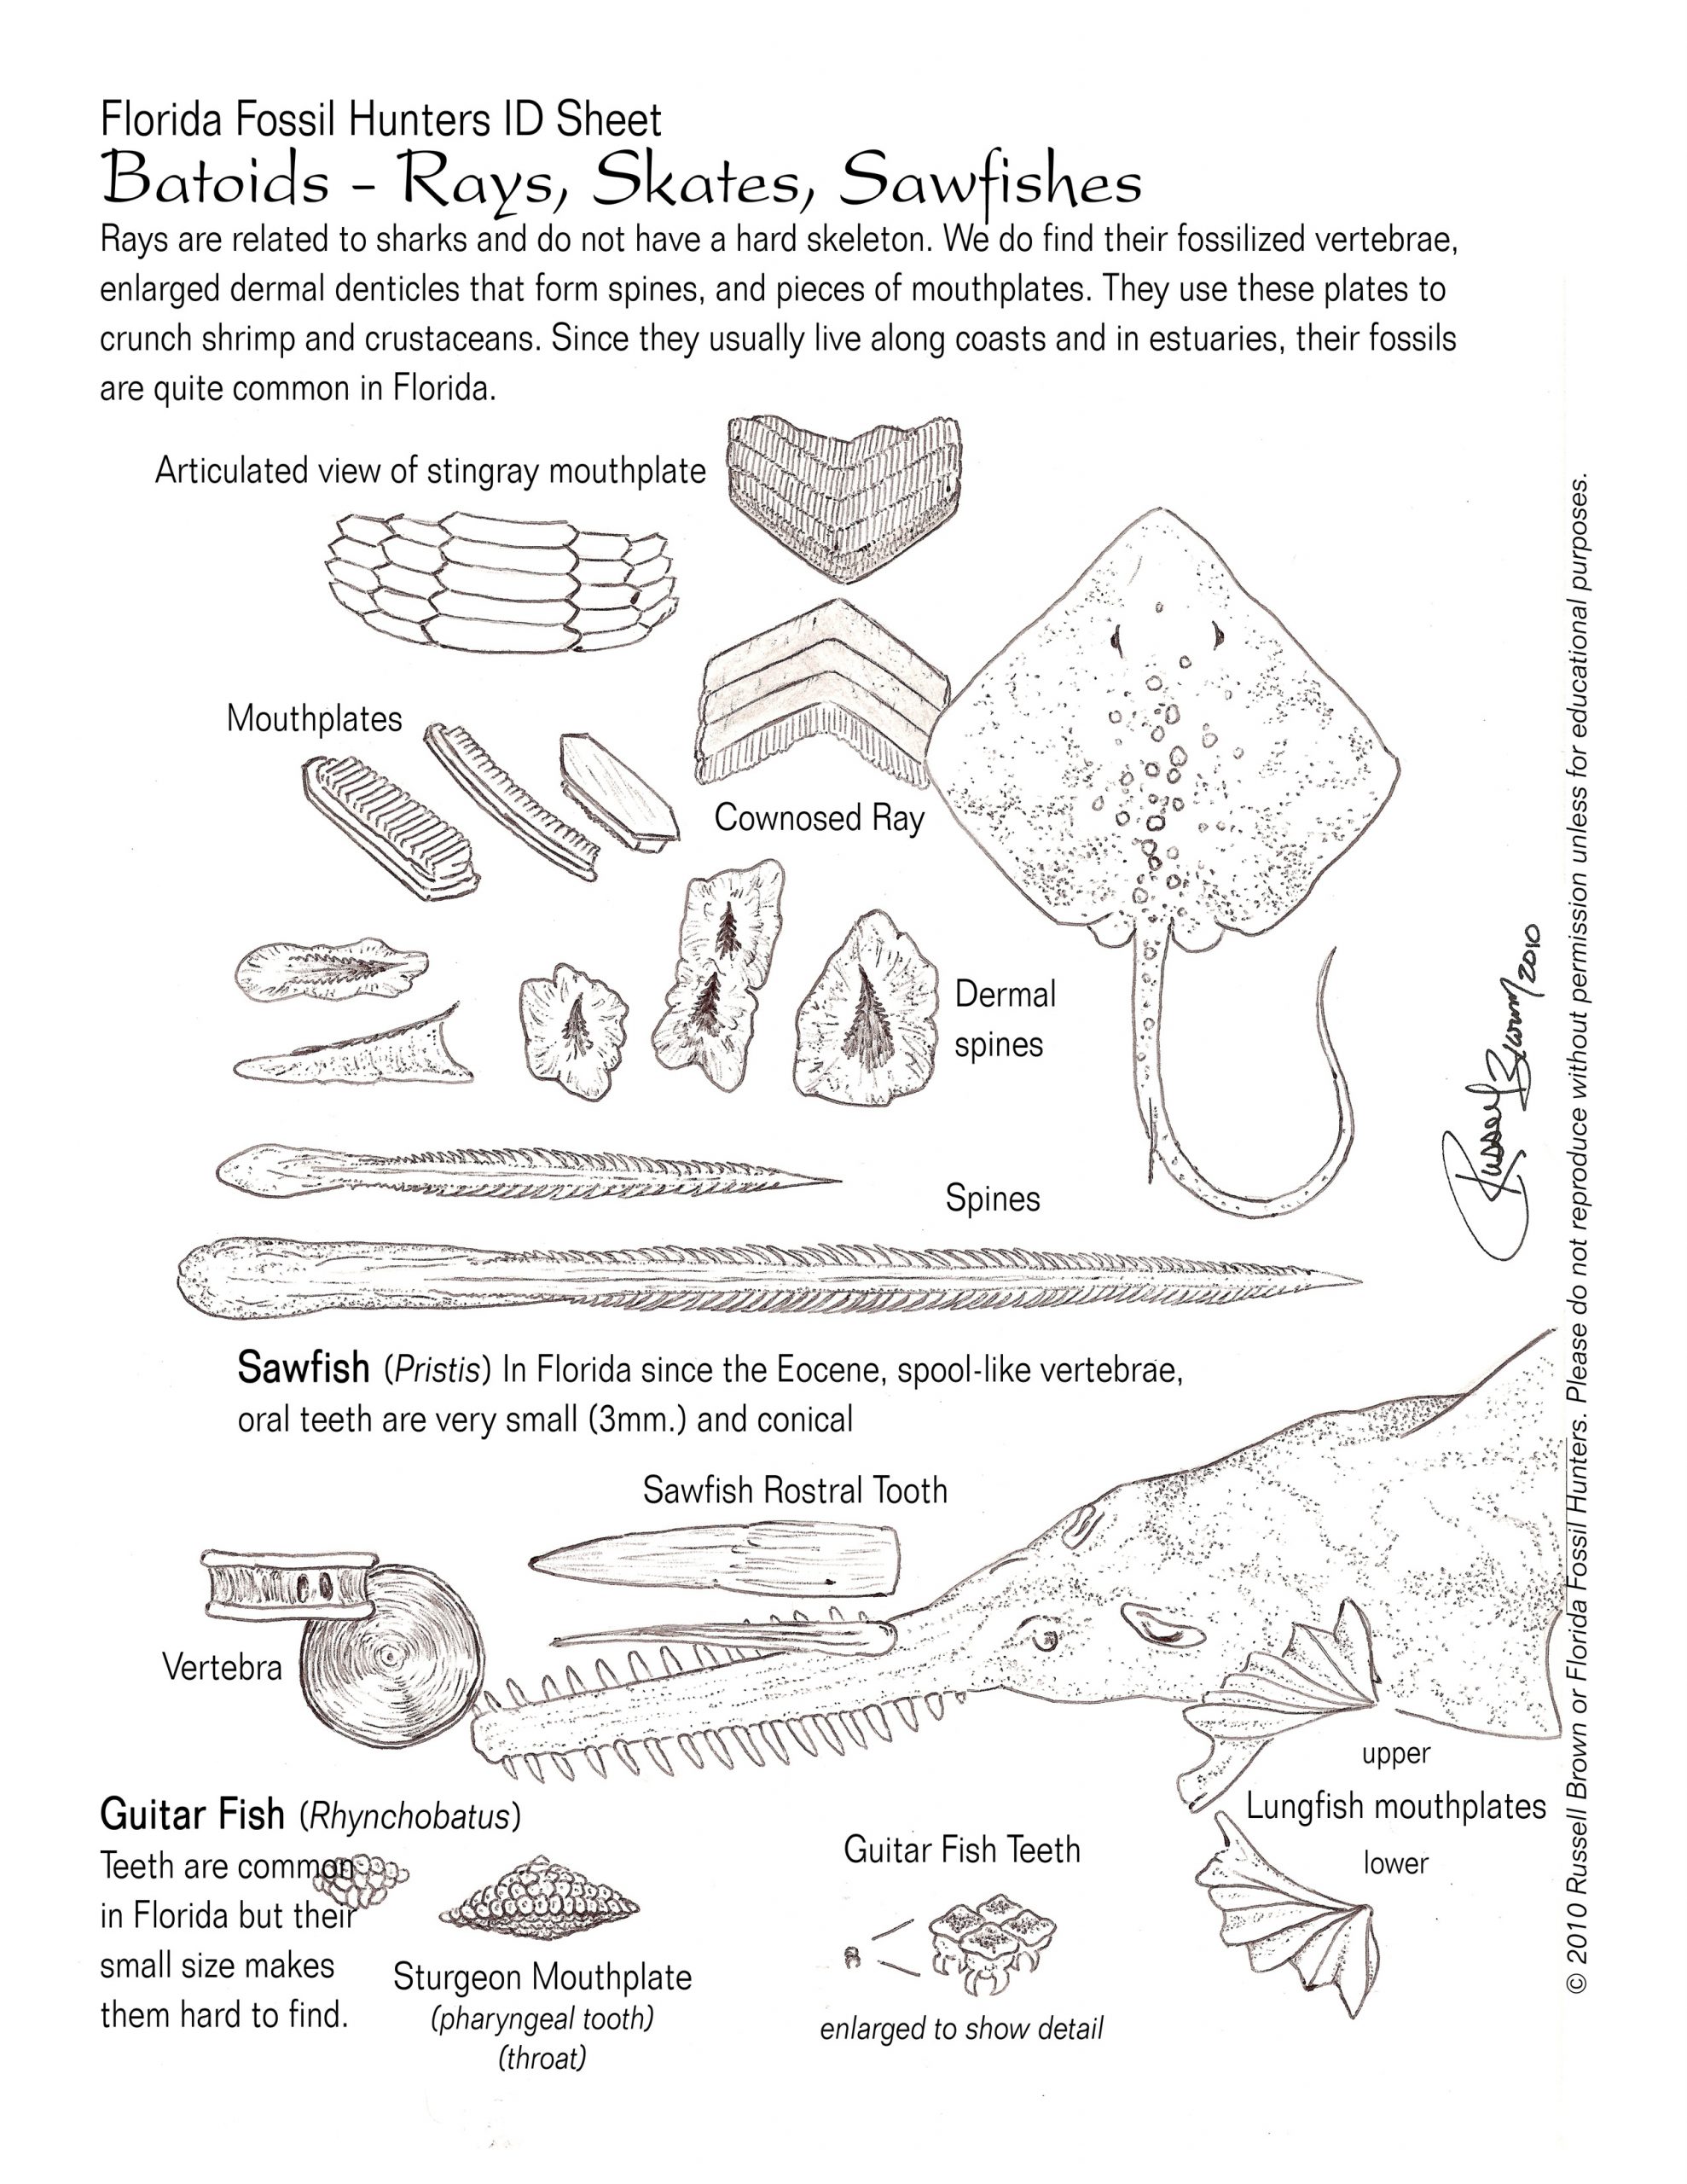 Fossil ID Sheets by Russell Brown | Florida Fossil Hunters